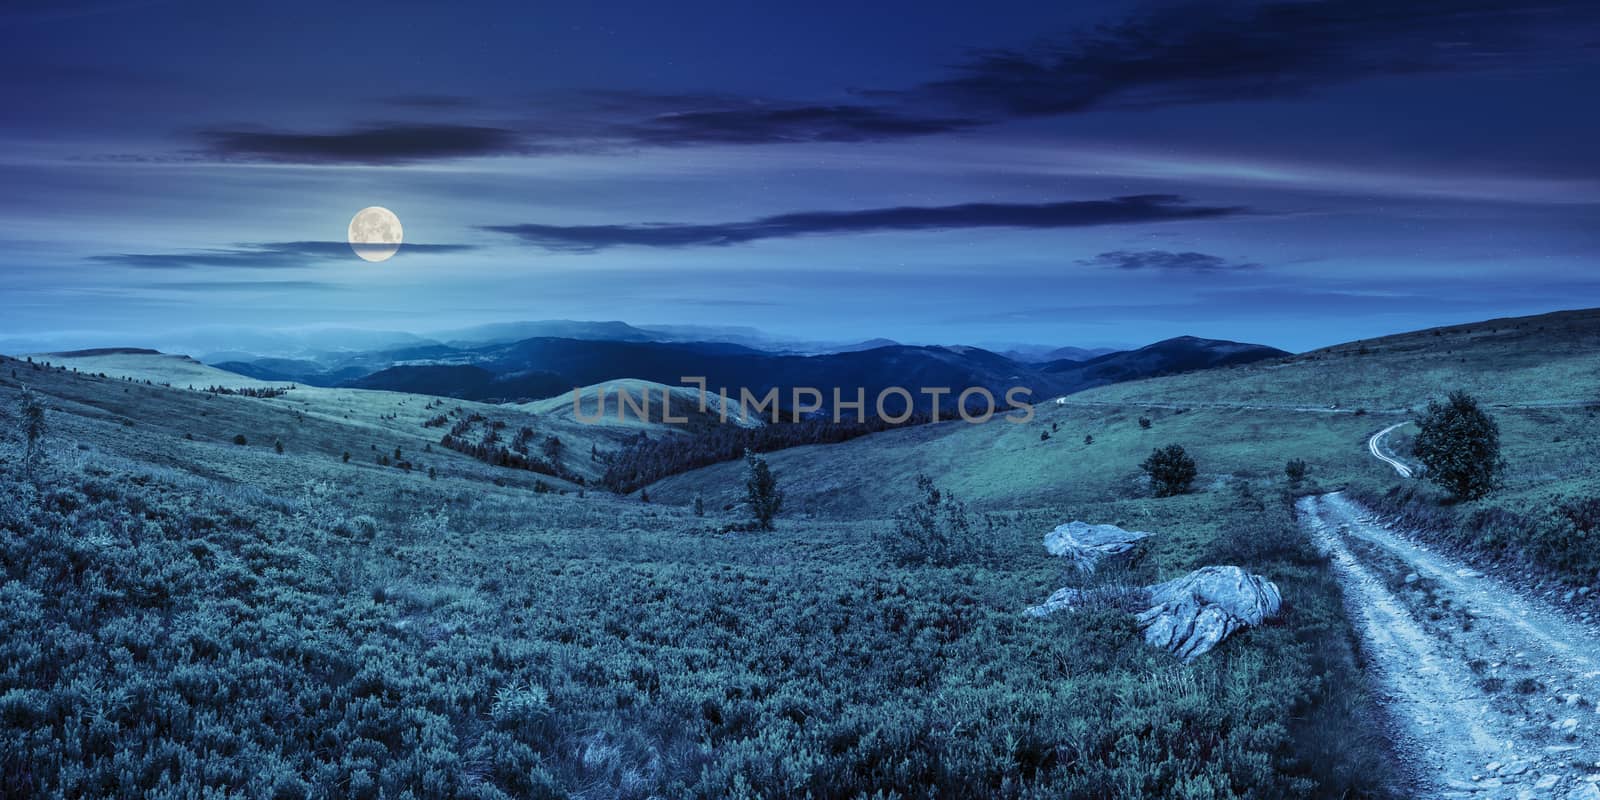 composite image of panoramic mountain landscape.  winding road on hillside meadow, few stones and trees along the road. conifer forest far away on mountains at night in full moon light